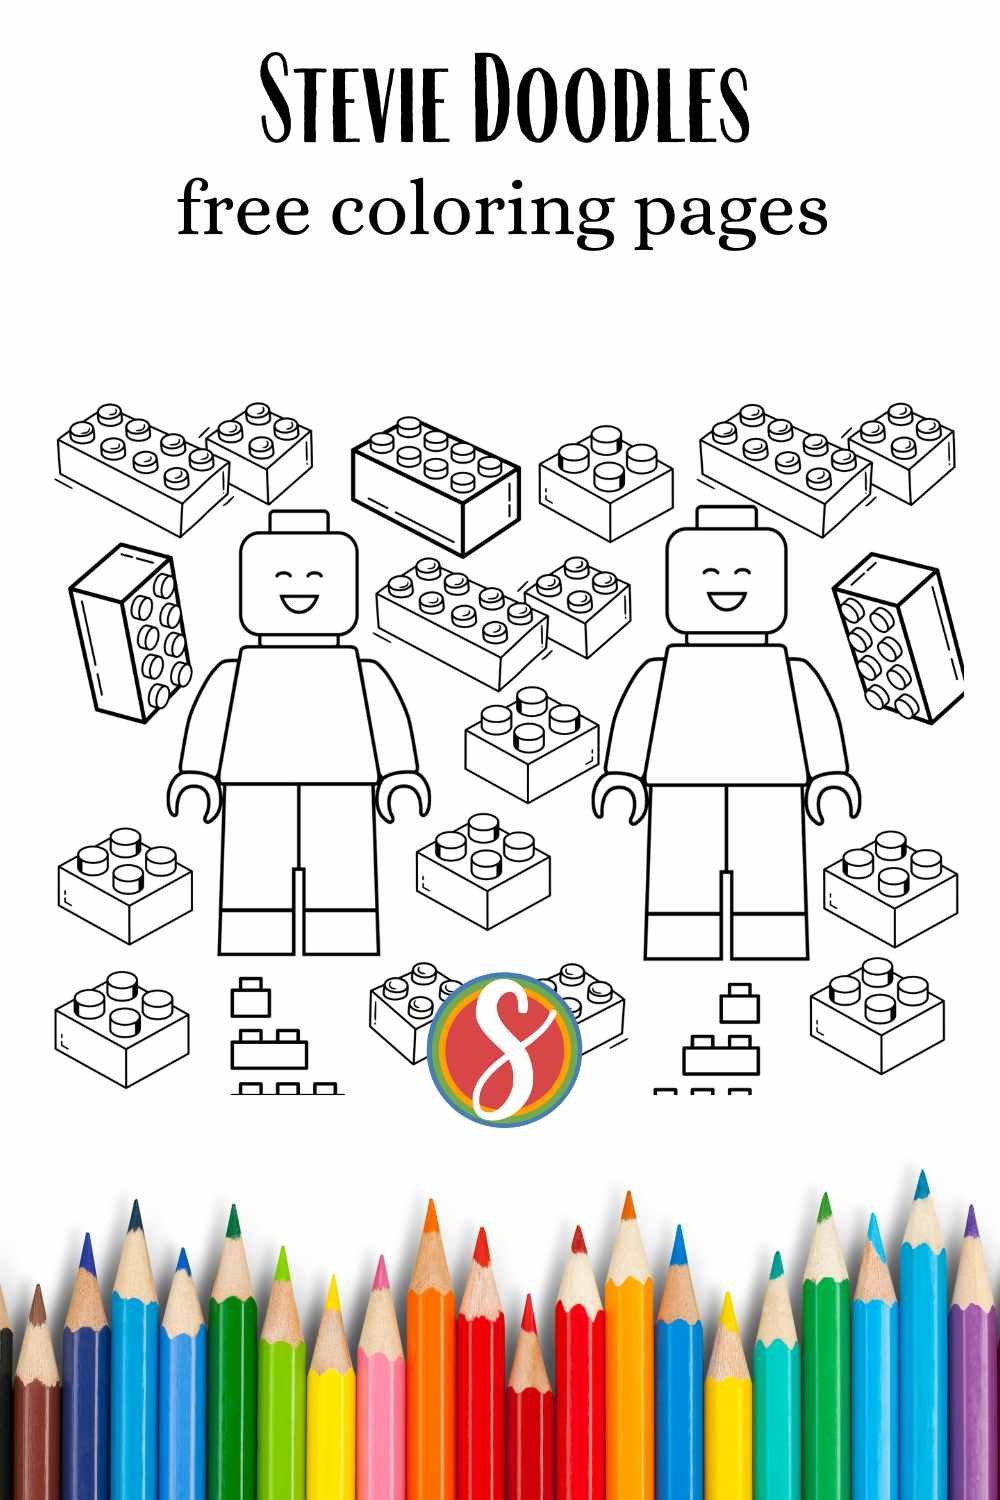 2 lego men surrounded by colorable lego blocks